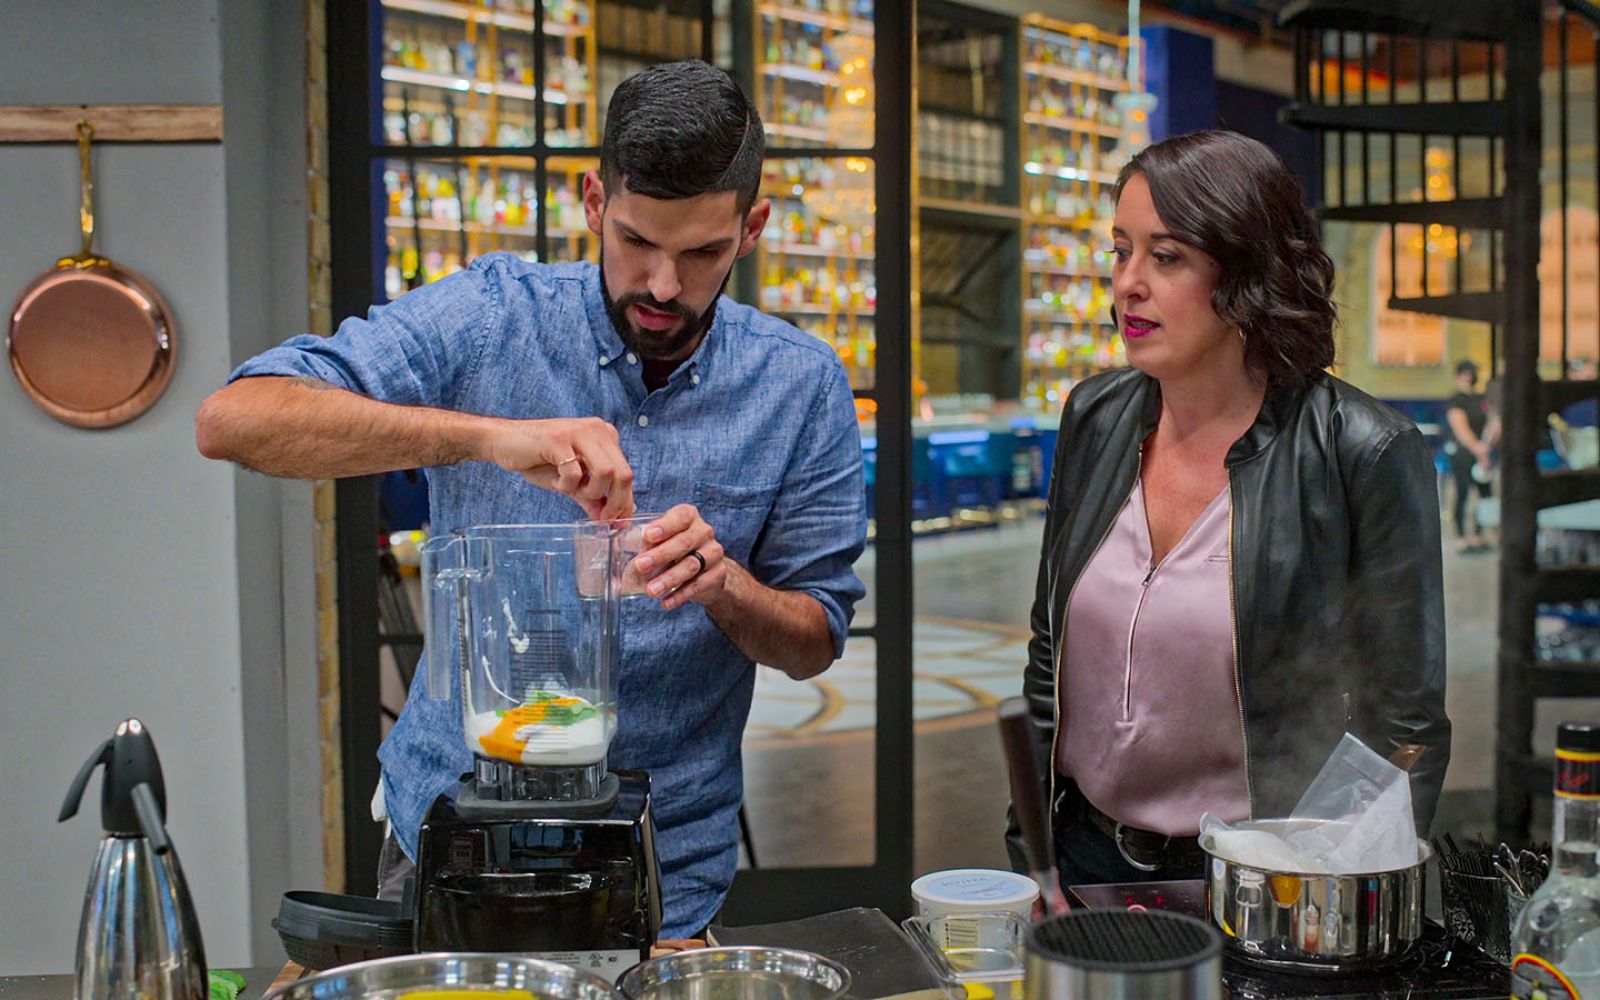 Raj Shukla competes on the new Netflix show "Drink Masters."